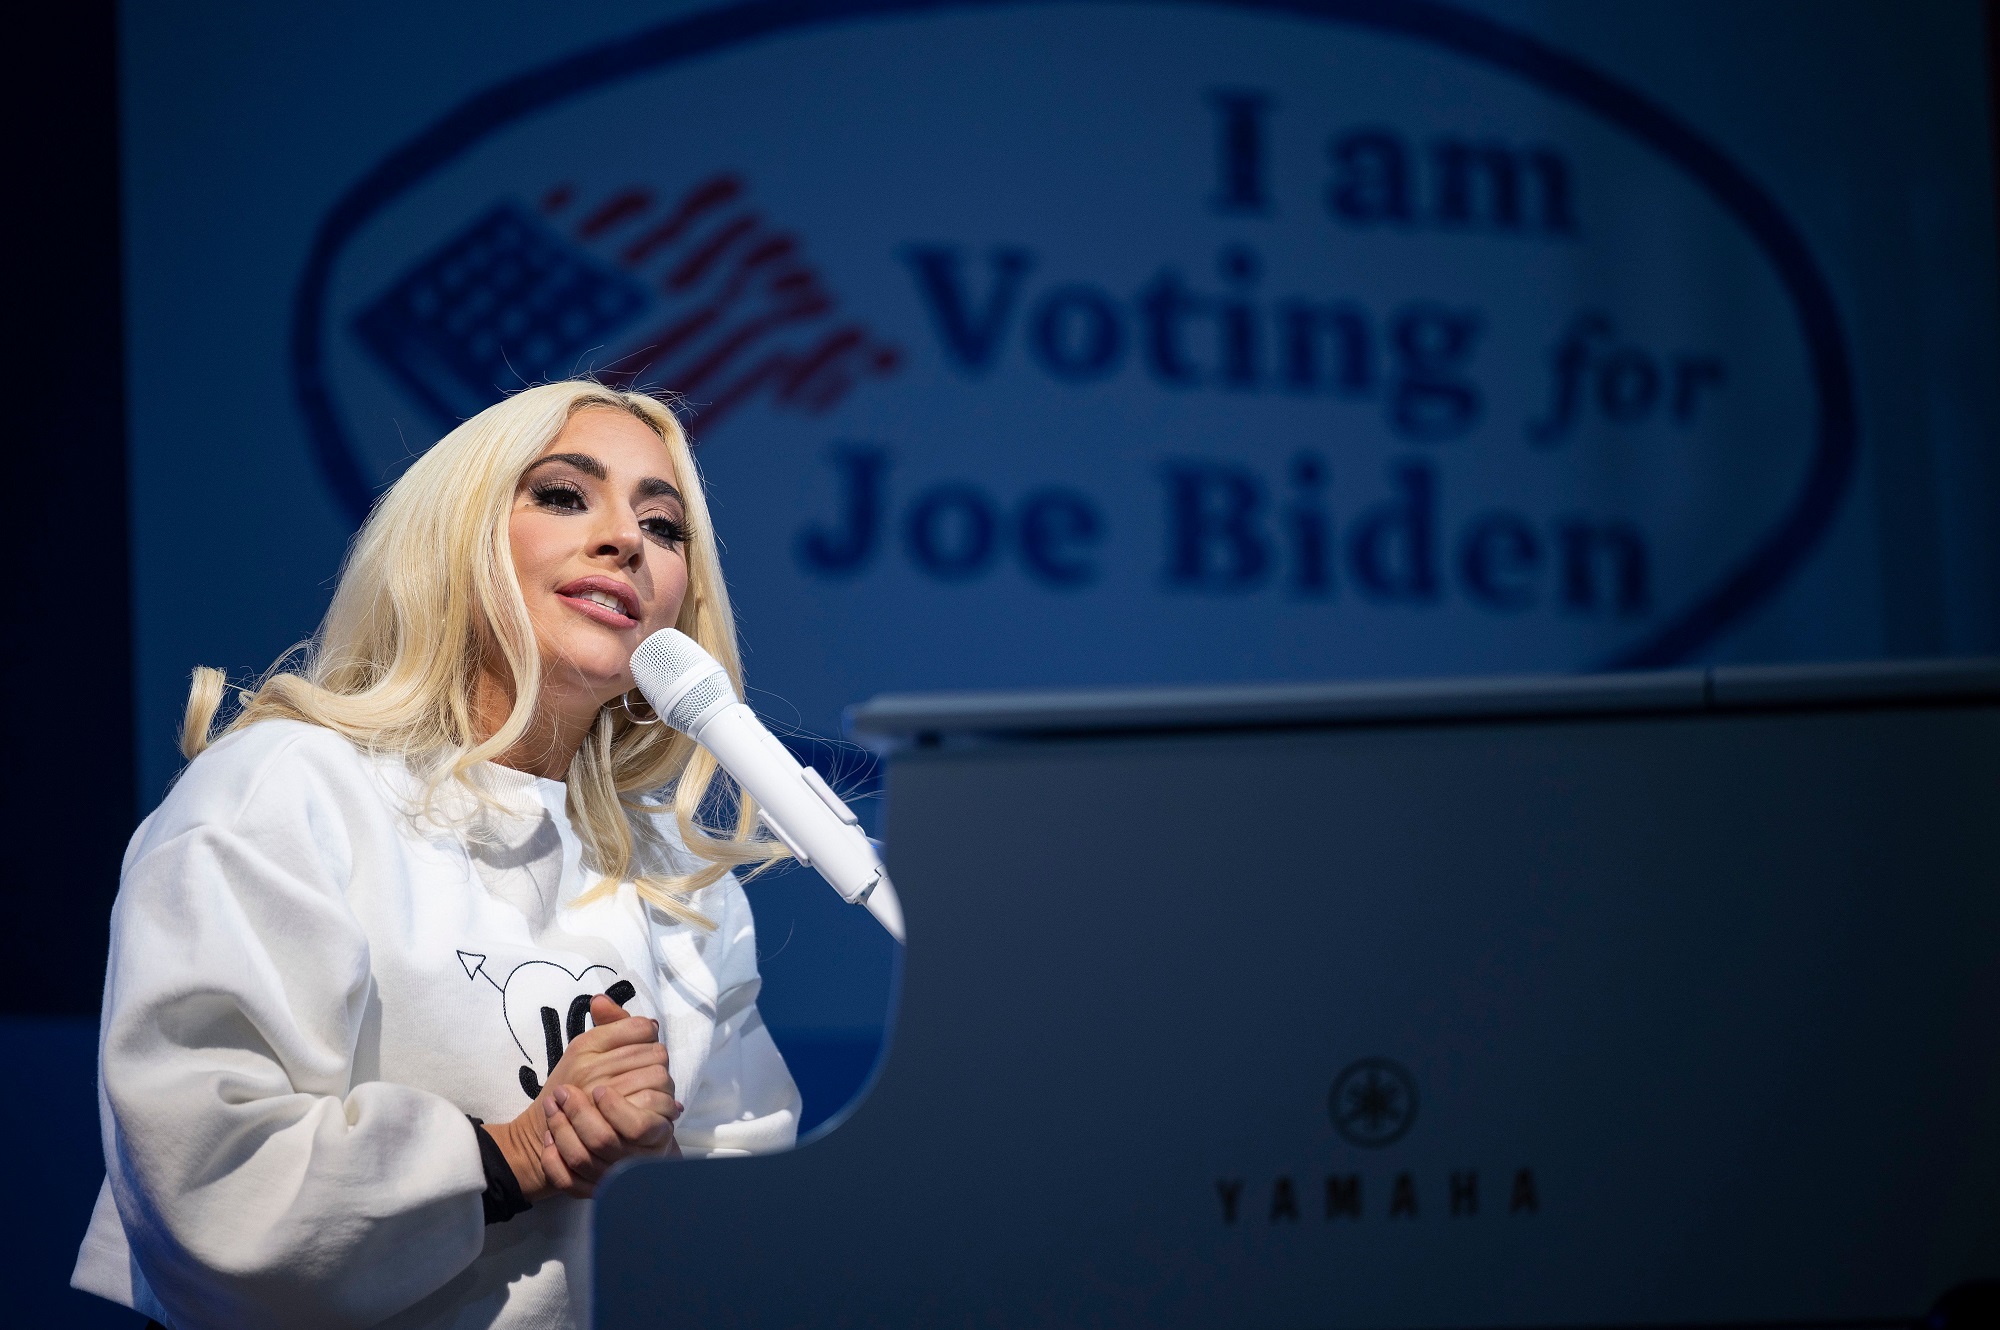 Lady Gaga performs prior to Democratic presidential candidate Joe Biden speaking during a Drive-In Rally in Pittsburgh, Pennsylvania, on November 2, 2020.